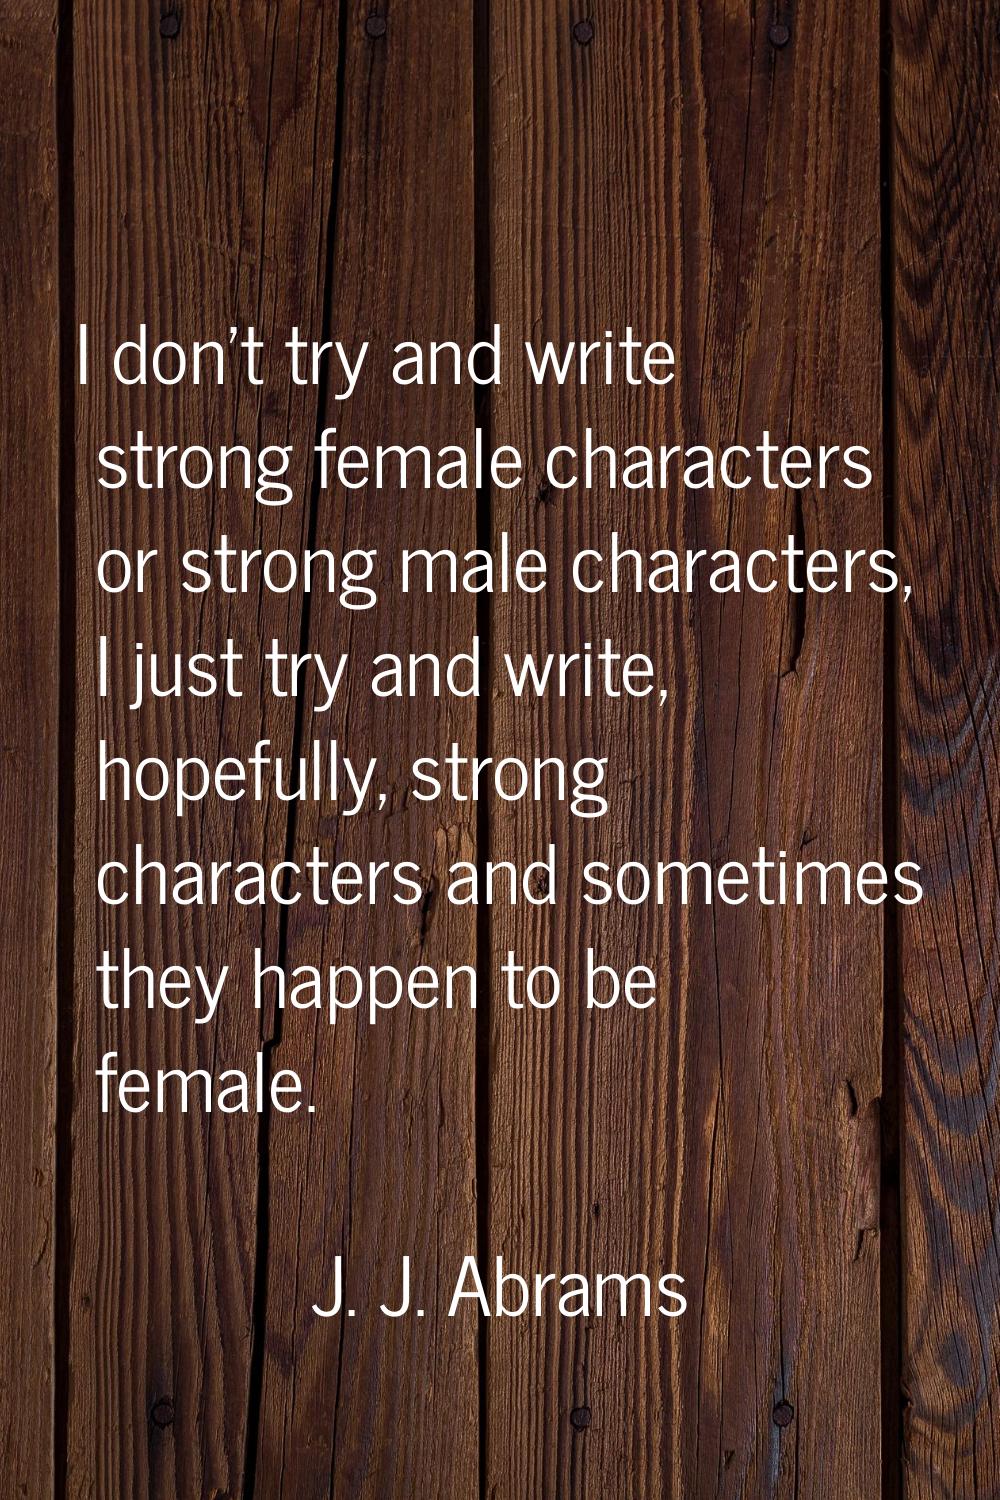 I don't try and write strong female characters or strong male characters, I just try and write, hop